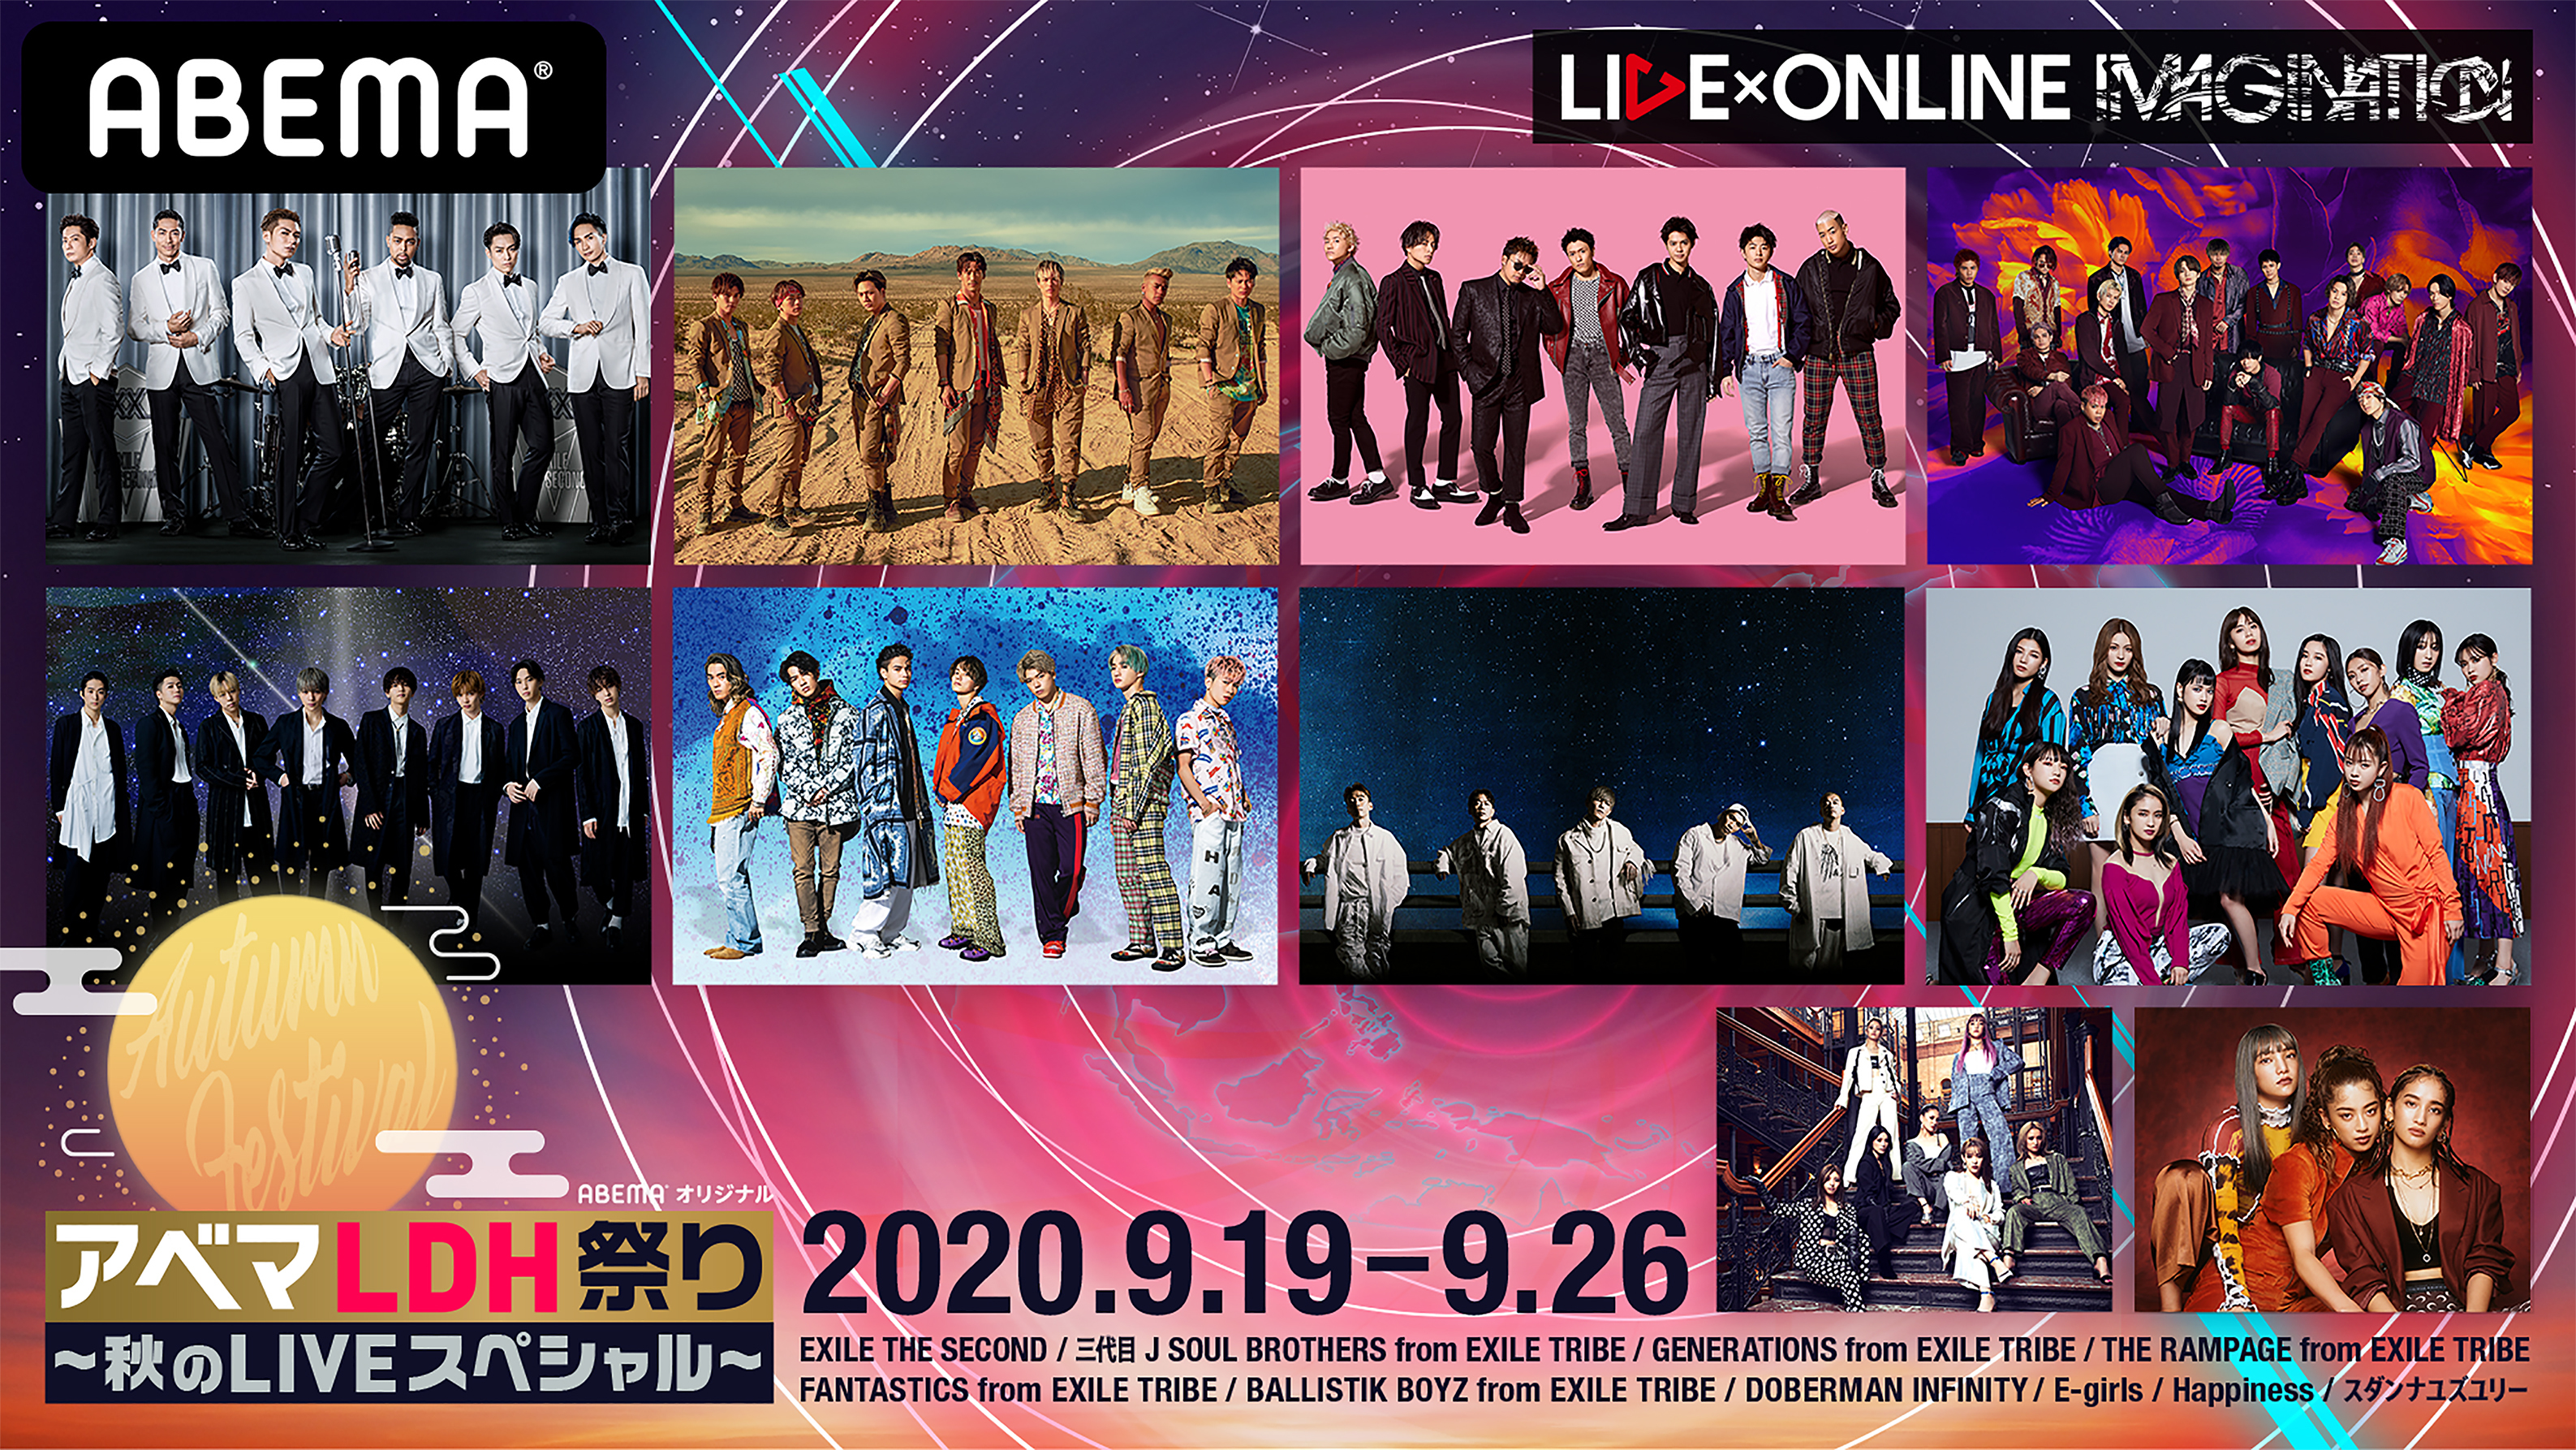 Abema Ppv Online Live にてldhの新たなライブ エンタテインメント Live Online 第2弾を独占生配信決定 新たにballistik Boyz From Exile Tribe Happiness スダンナユズユリーが参戦 株式会社サイバーエージェント